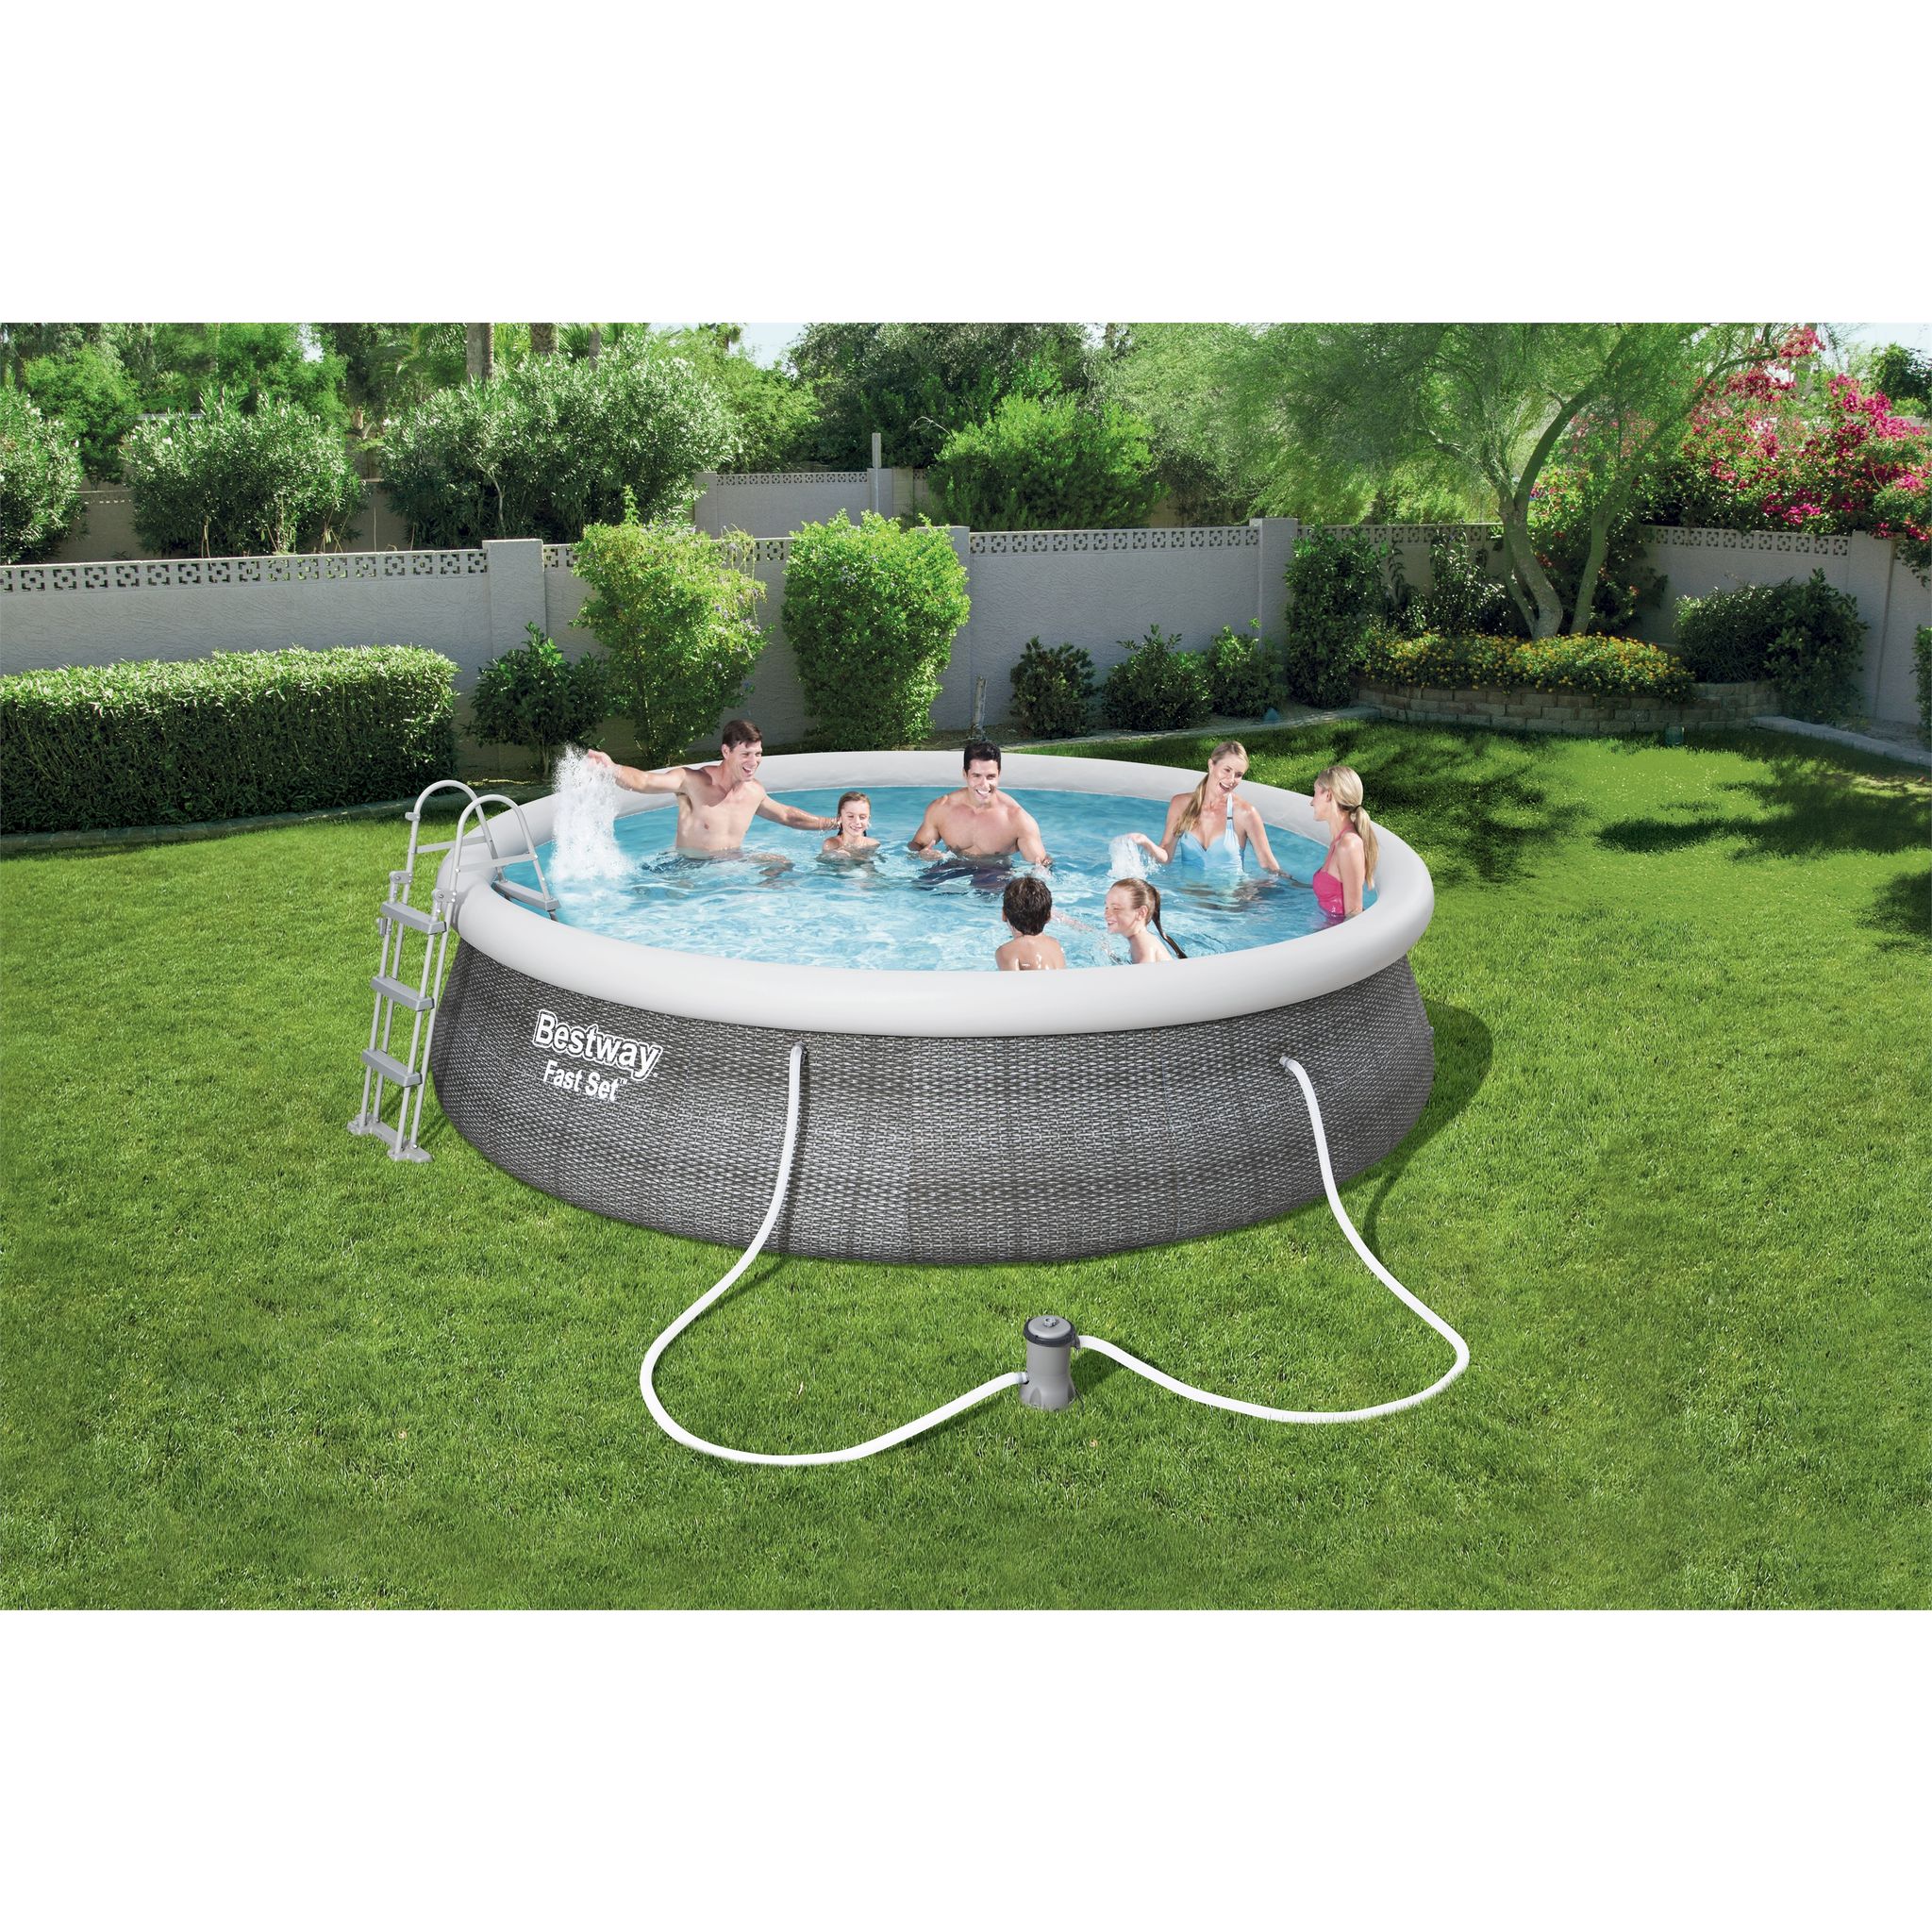 lack Counting insects Take out BESTWAY Piscine hors sol ronde 457 x 107 cm Fast Set motif rotin gris pas  cher à prix Auchan